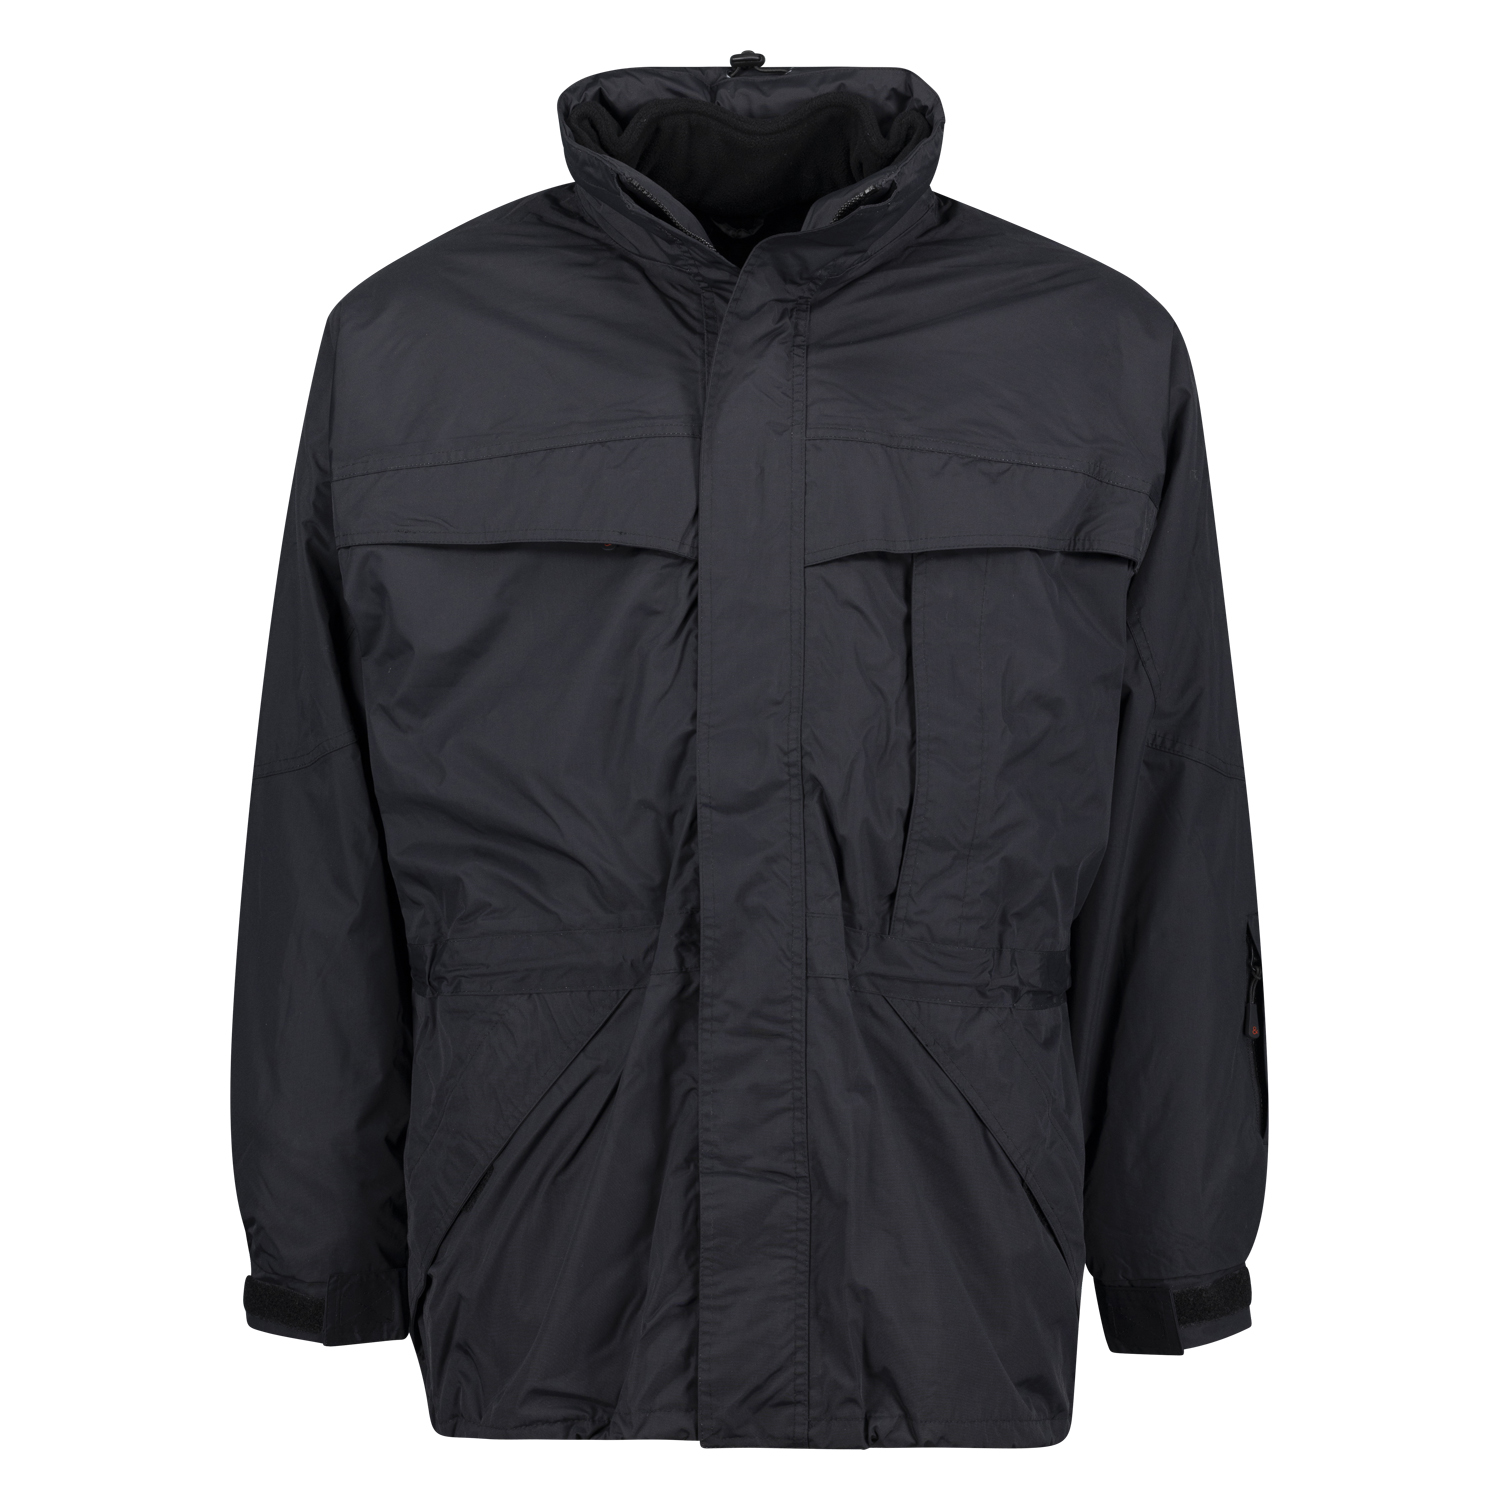 Black 3in1 jacket by marc&mark in extra large sizes until 10XL